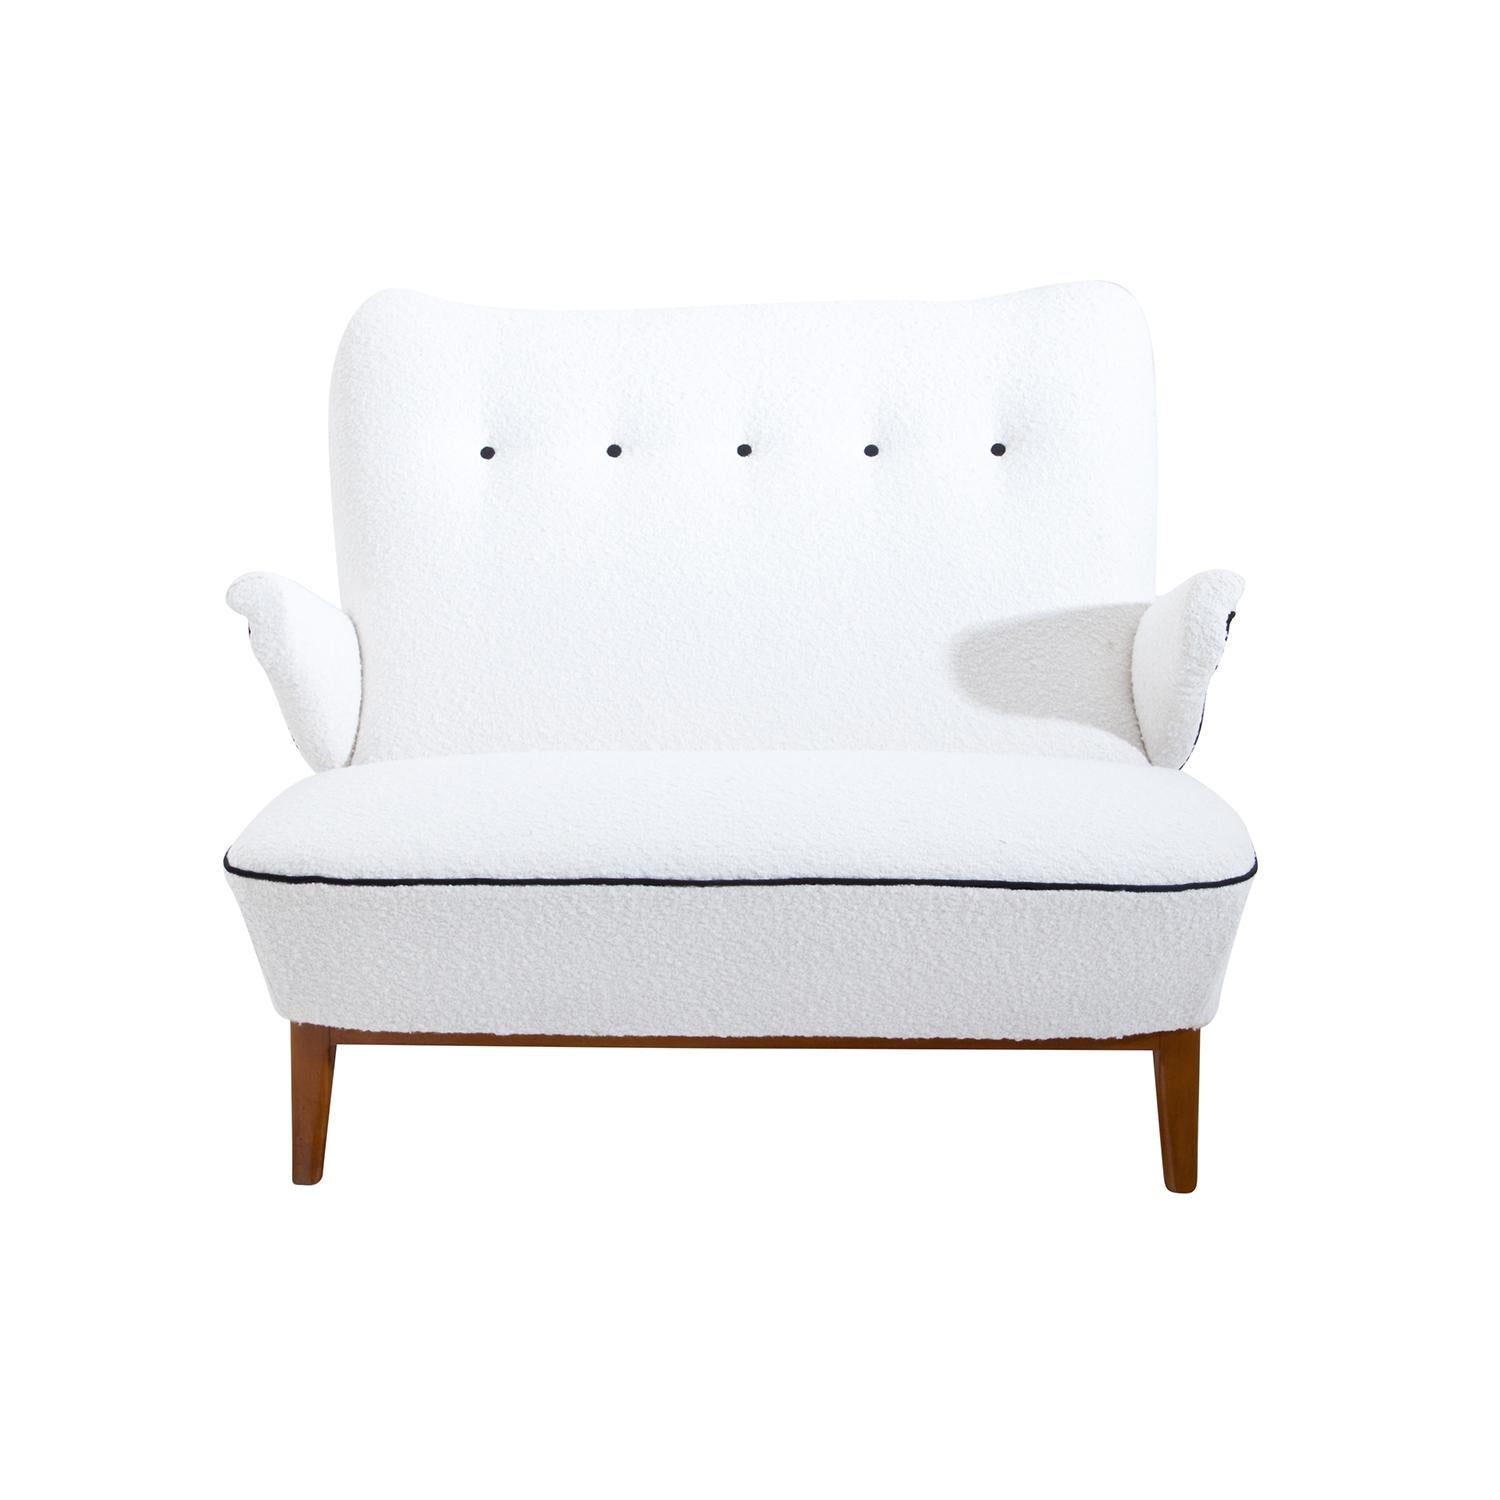 A white, vintage Mid-Century Modern Dutch living room set of a two seater Congo, small sofa and a pair of lounge chairs designed by Theo Ruth and produced by Artifort, in good condition. The seat backrest of the detailed settee, canapé is reclined